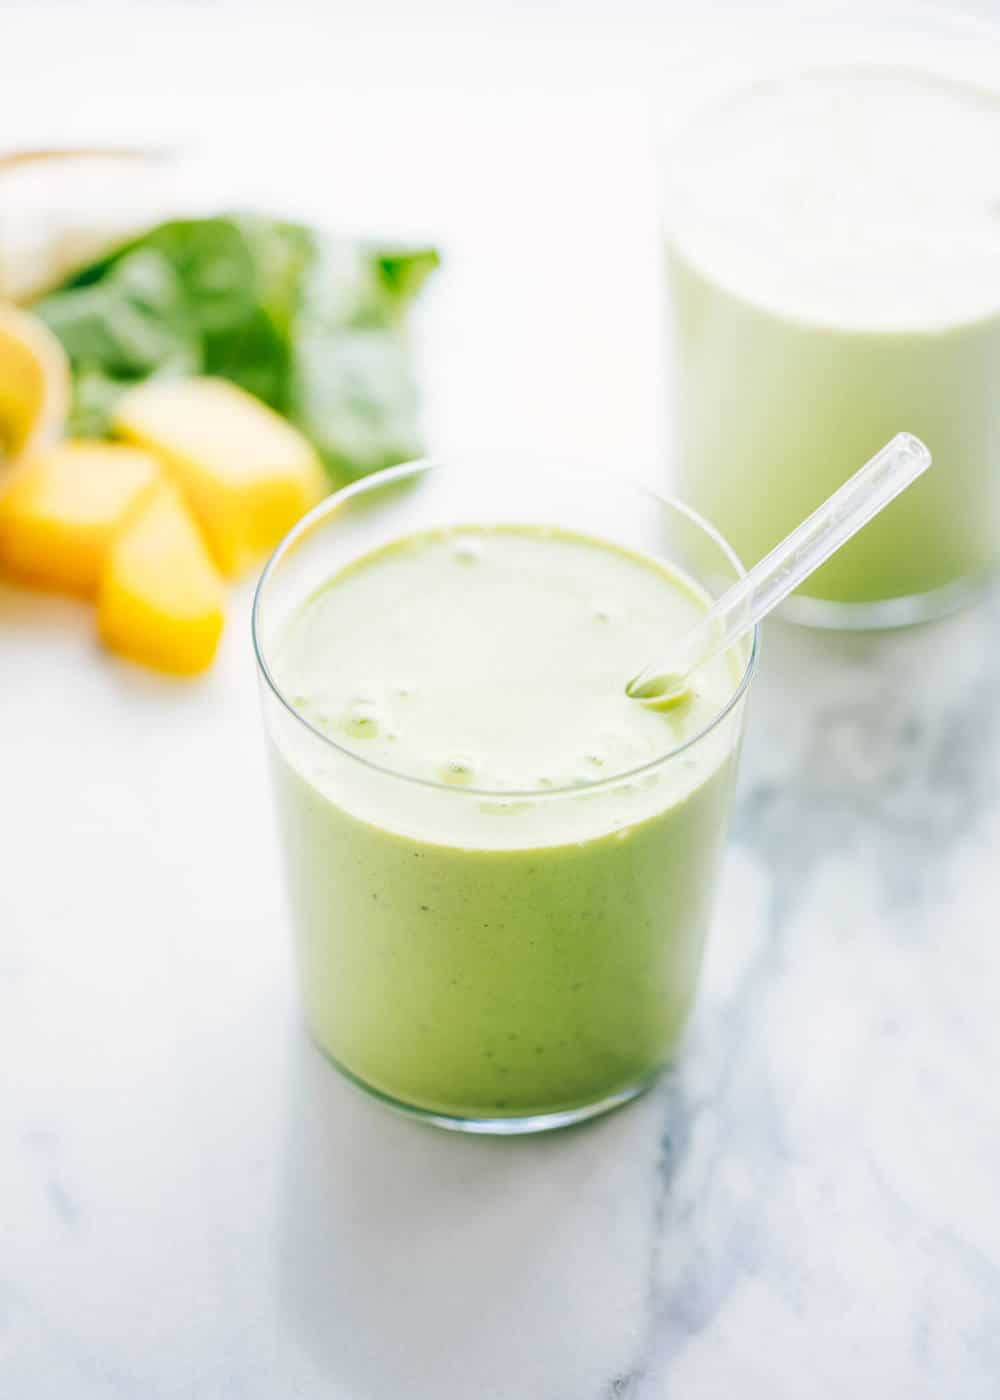 Healthy green smoothie recipe in a glass with a straw.